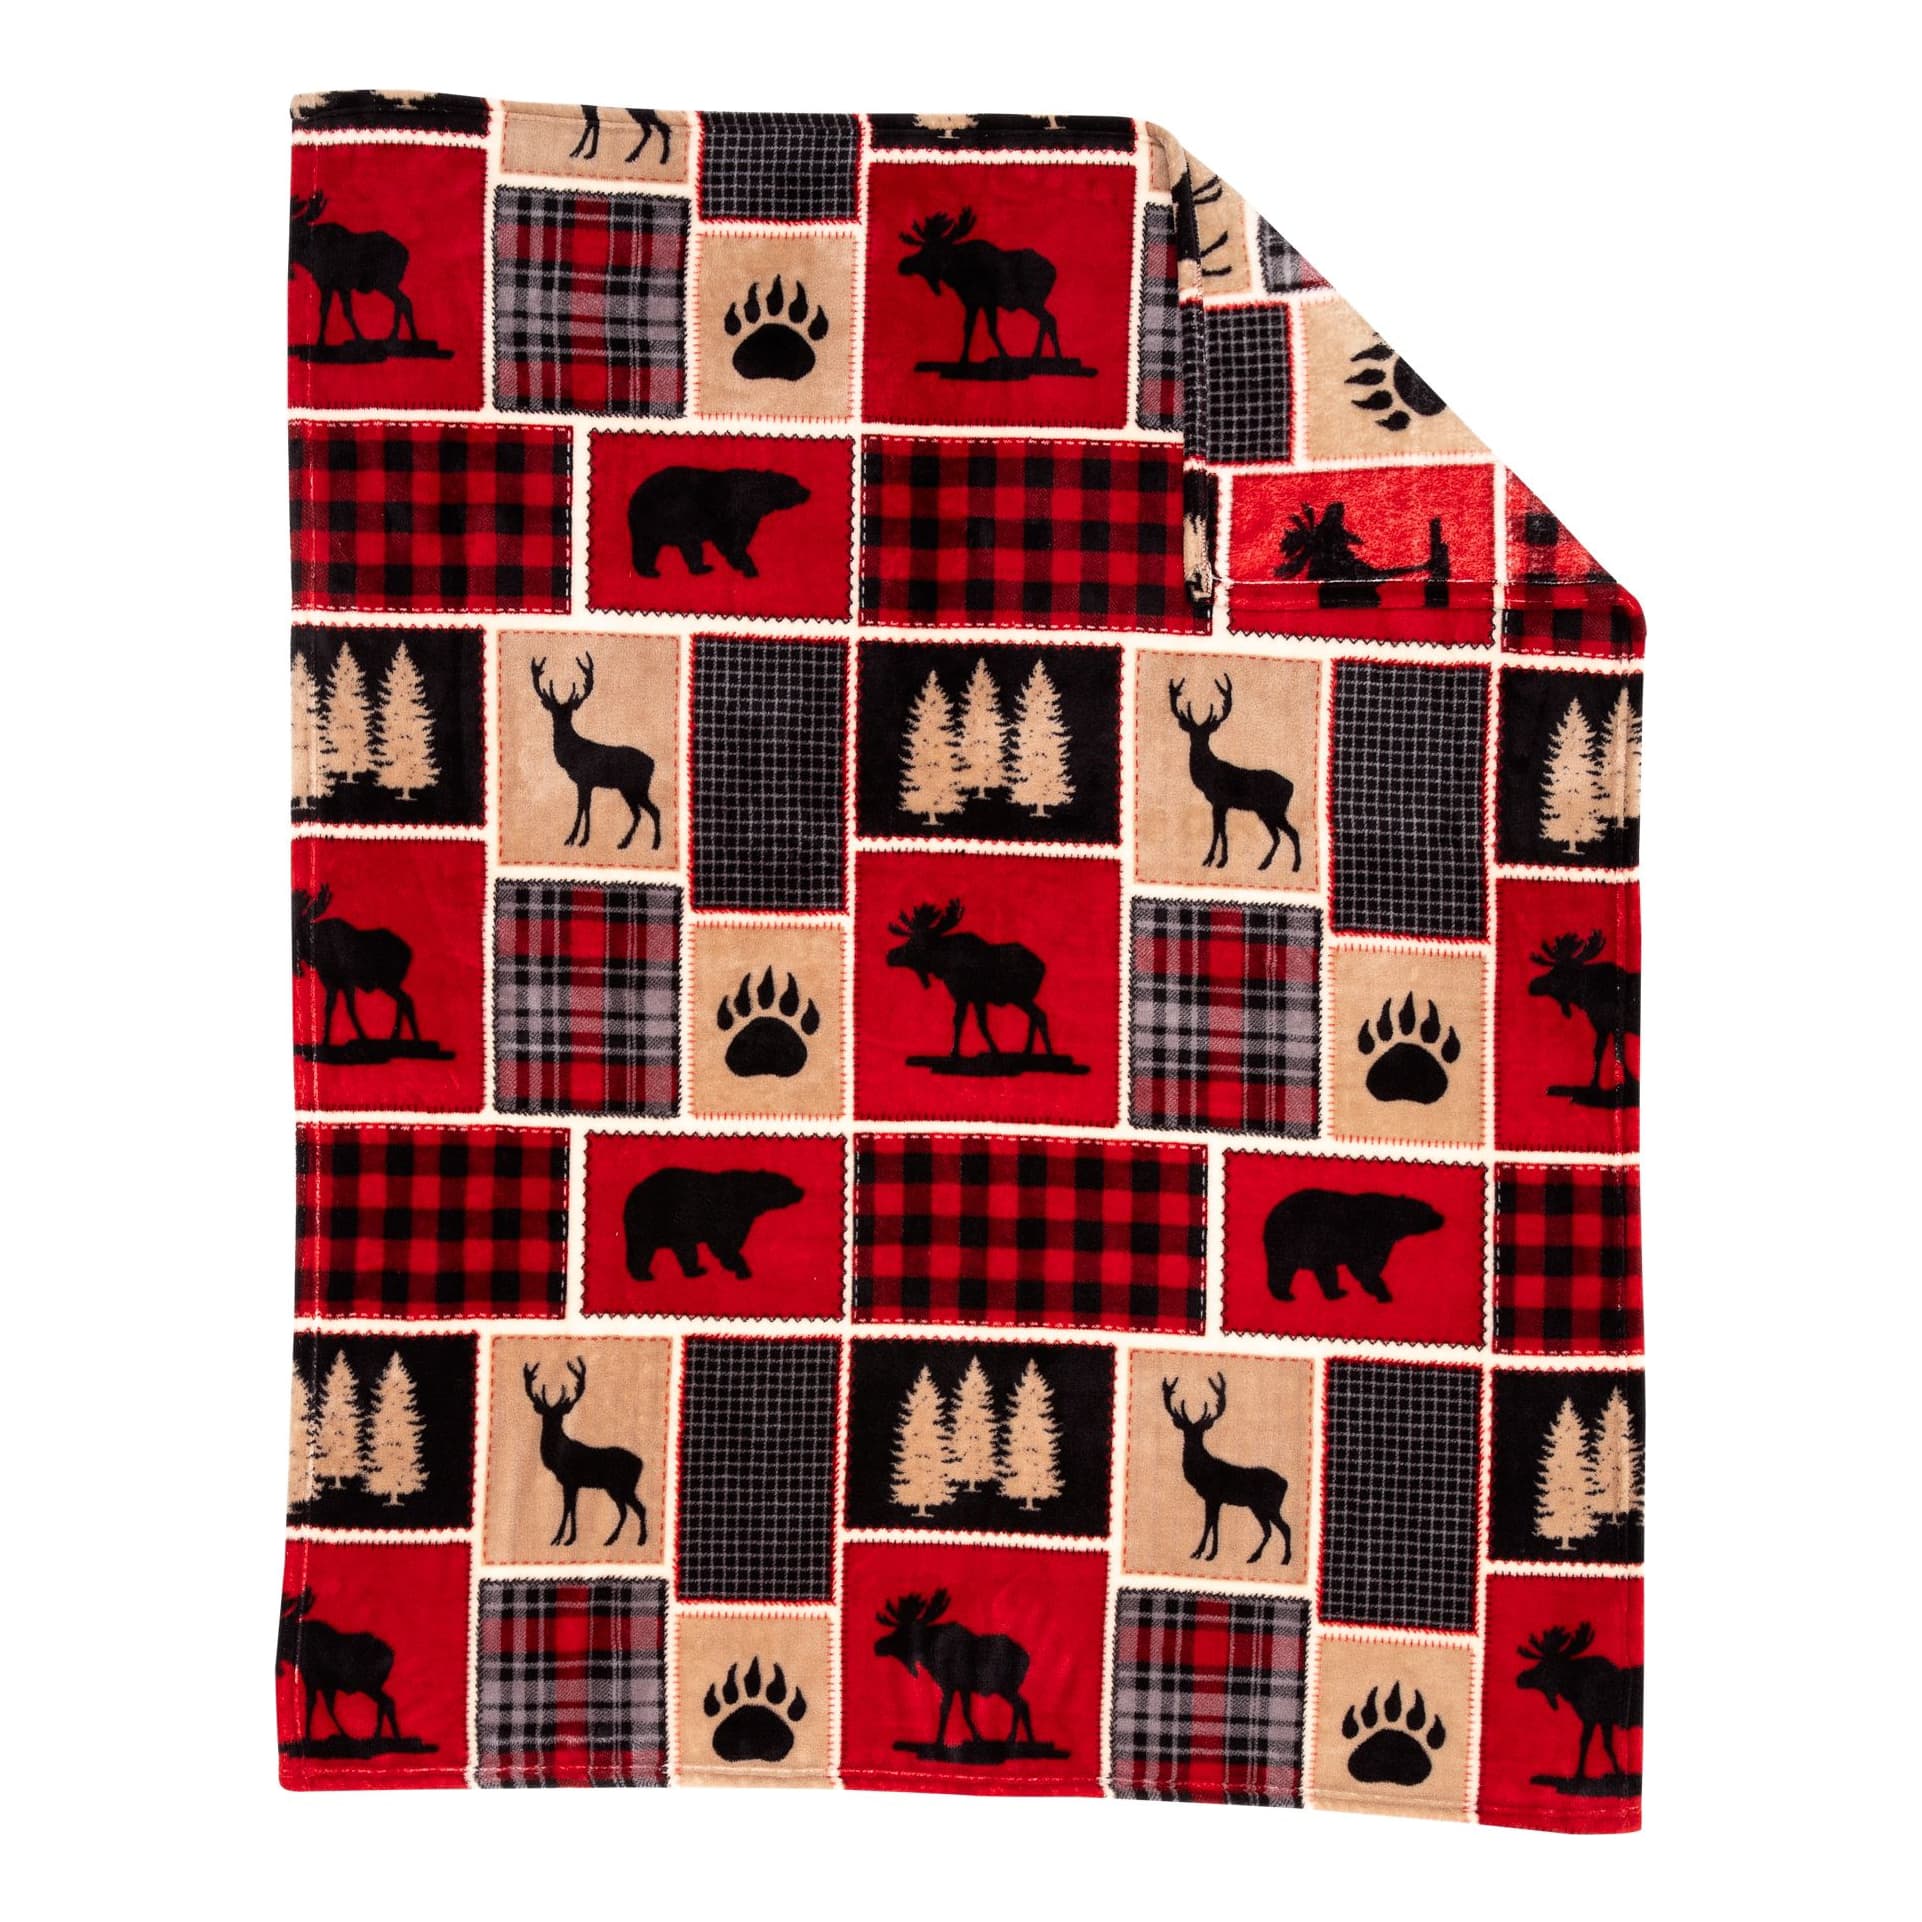 White River Northern Trail Coral Fleece Throw